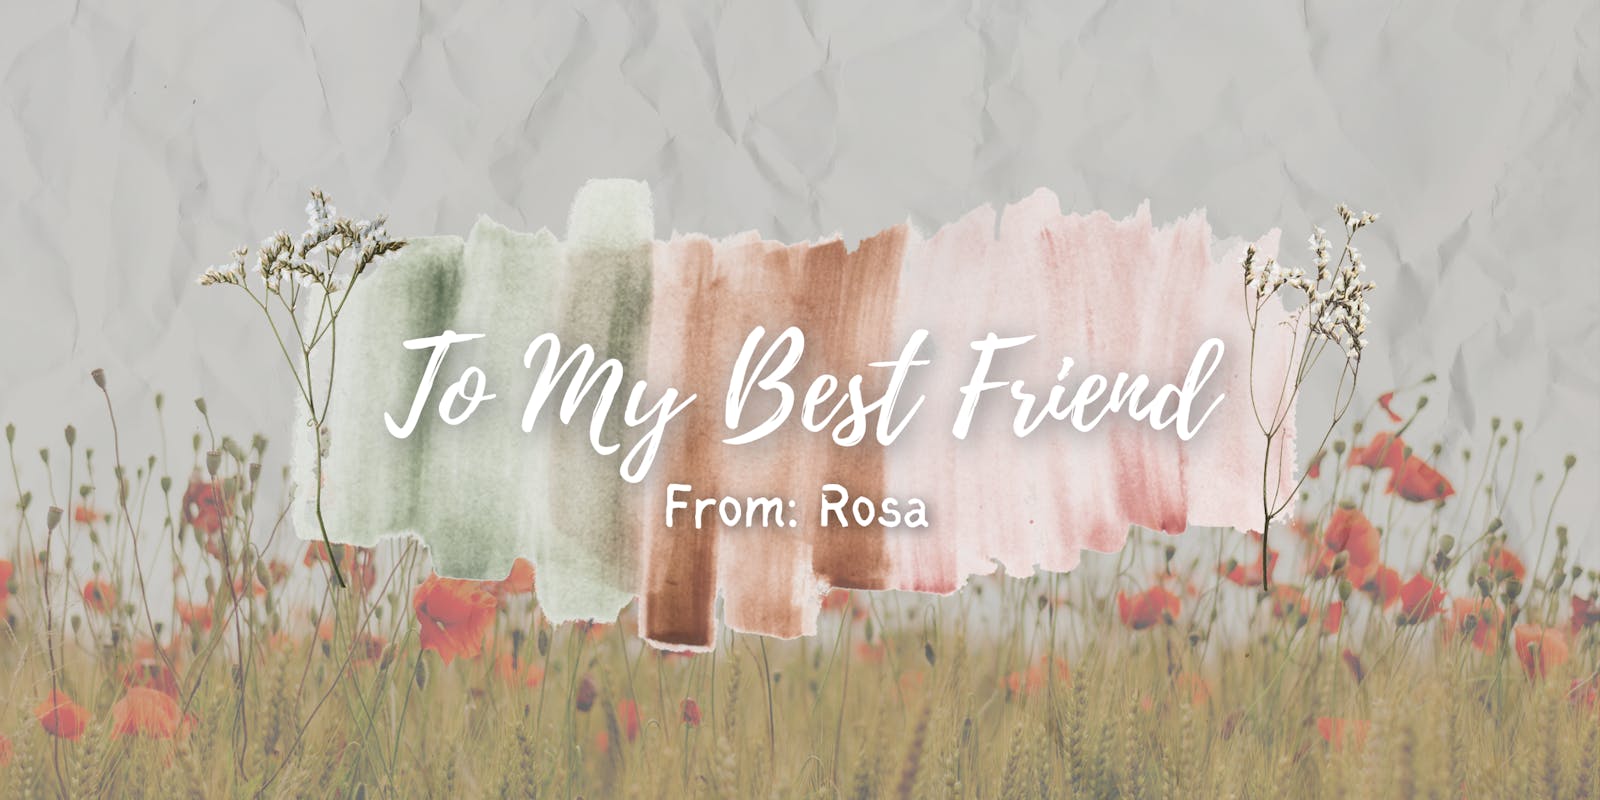 To My Best Friend by Rosa